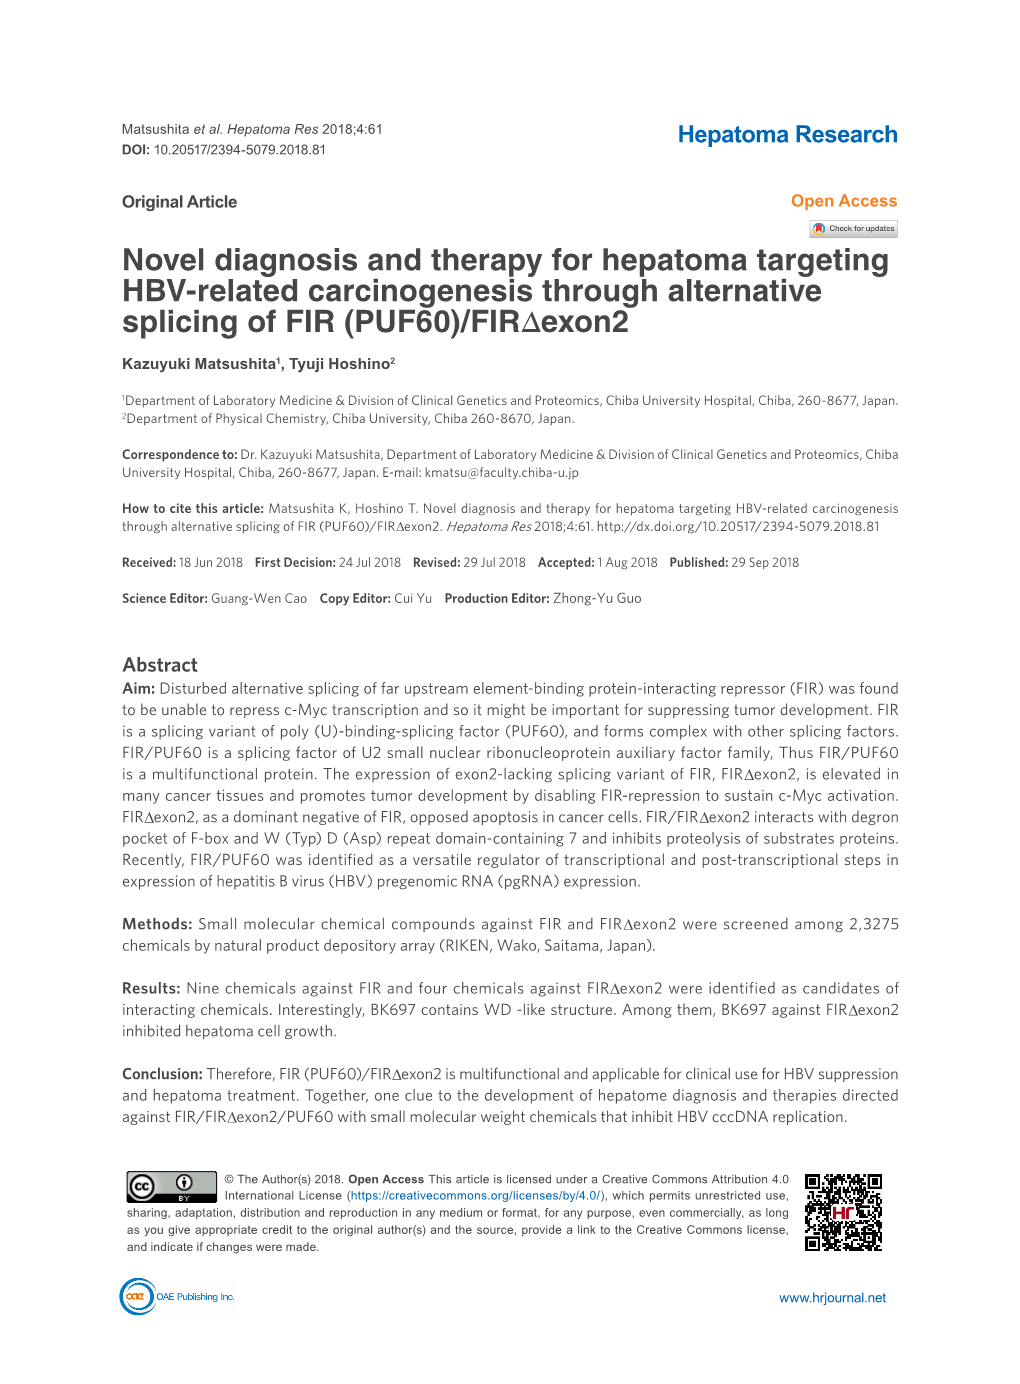 Novel Diagnosis and Therapy for Hepatoma Targeting HBV-Related Carcinogenesis Through Alternative Splicing of FIR (PUF60)/Firδexon2